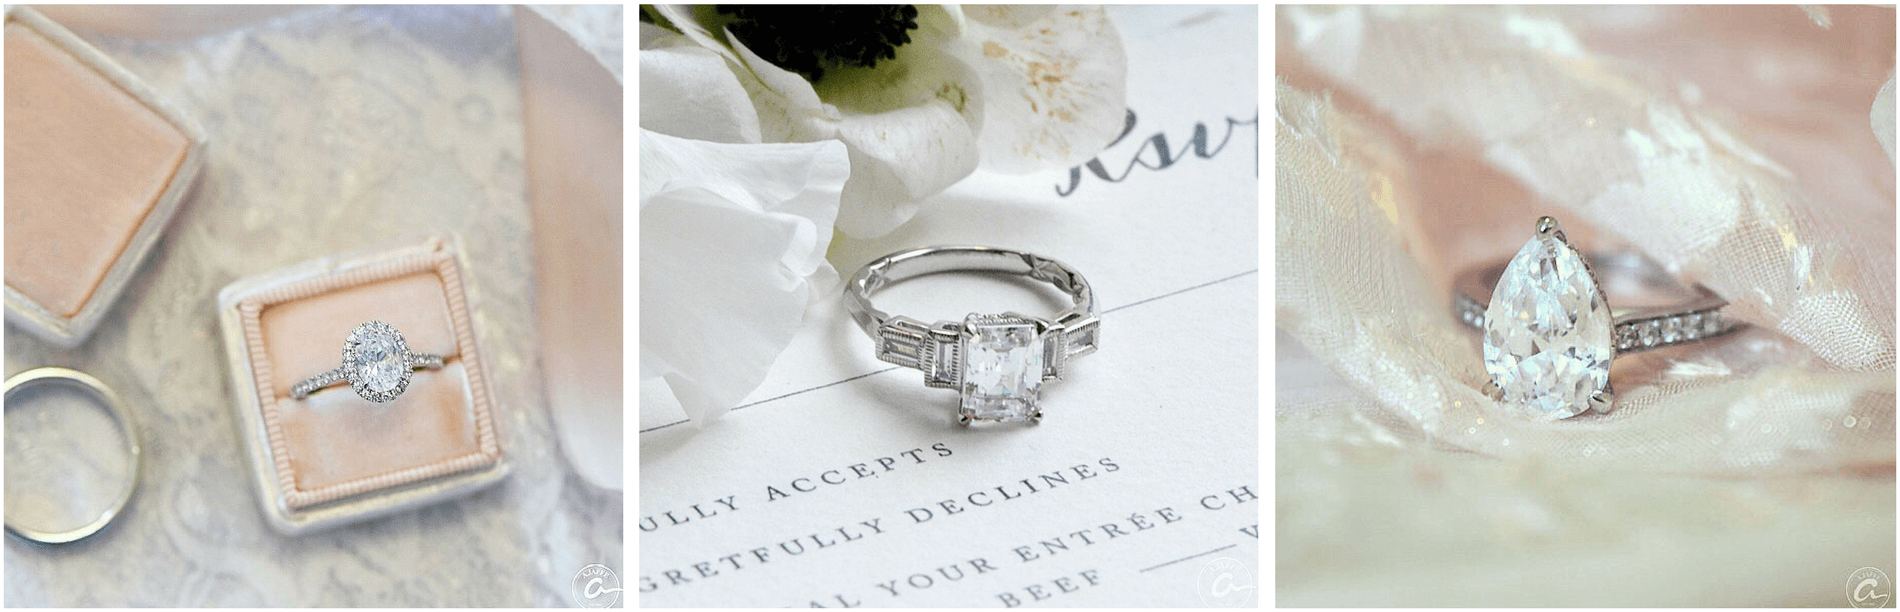 Diamond Engagement Rings at A. Jaffe